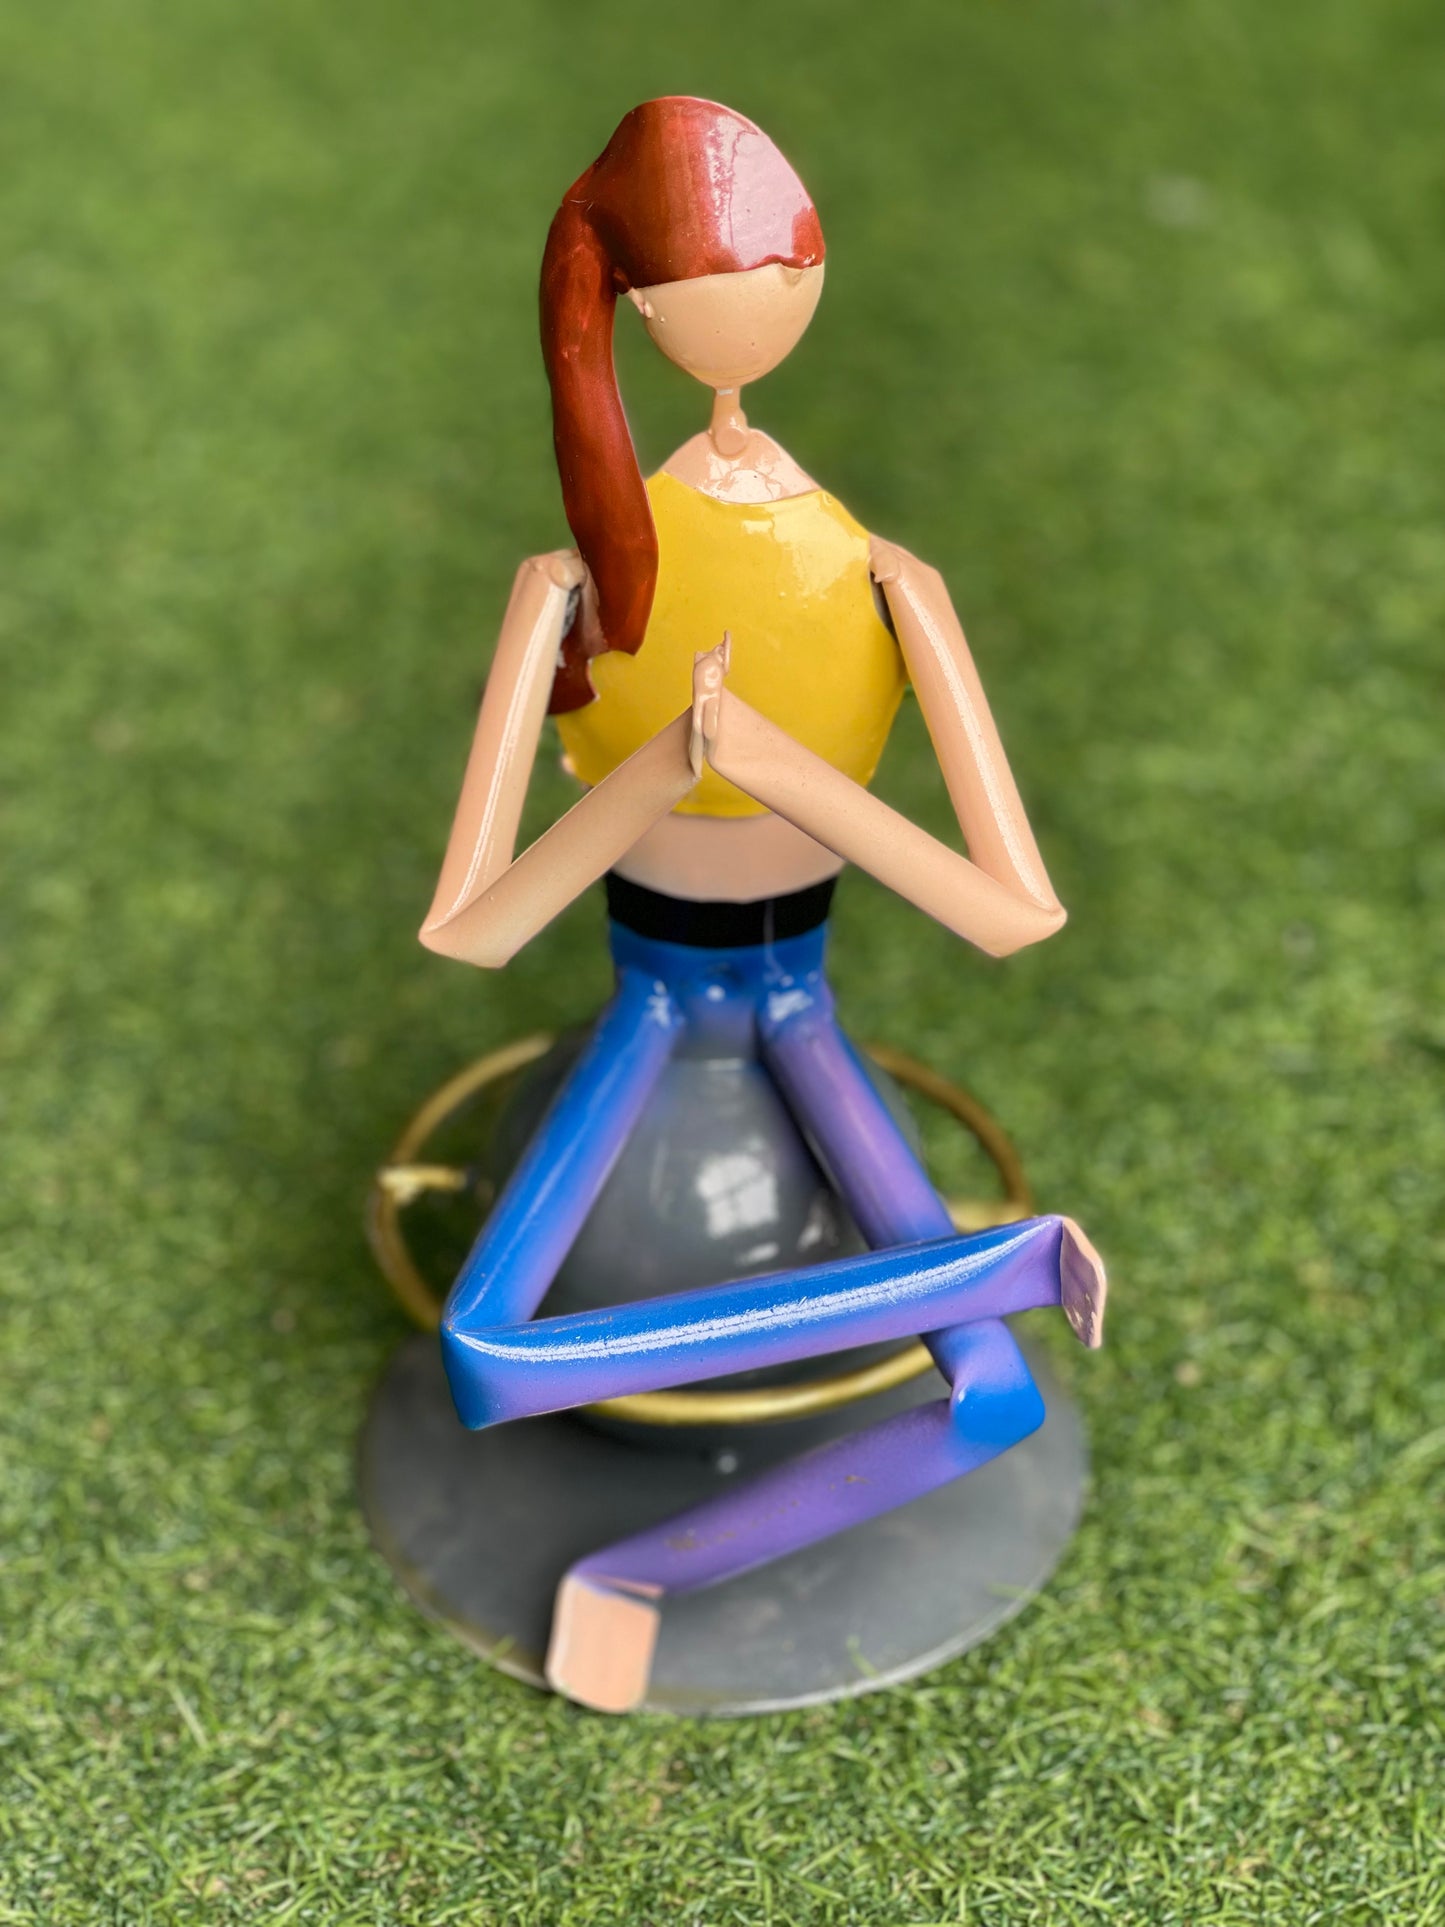 Colorful yoga dolls, set of 3 - Iron handcrafted